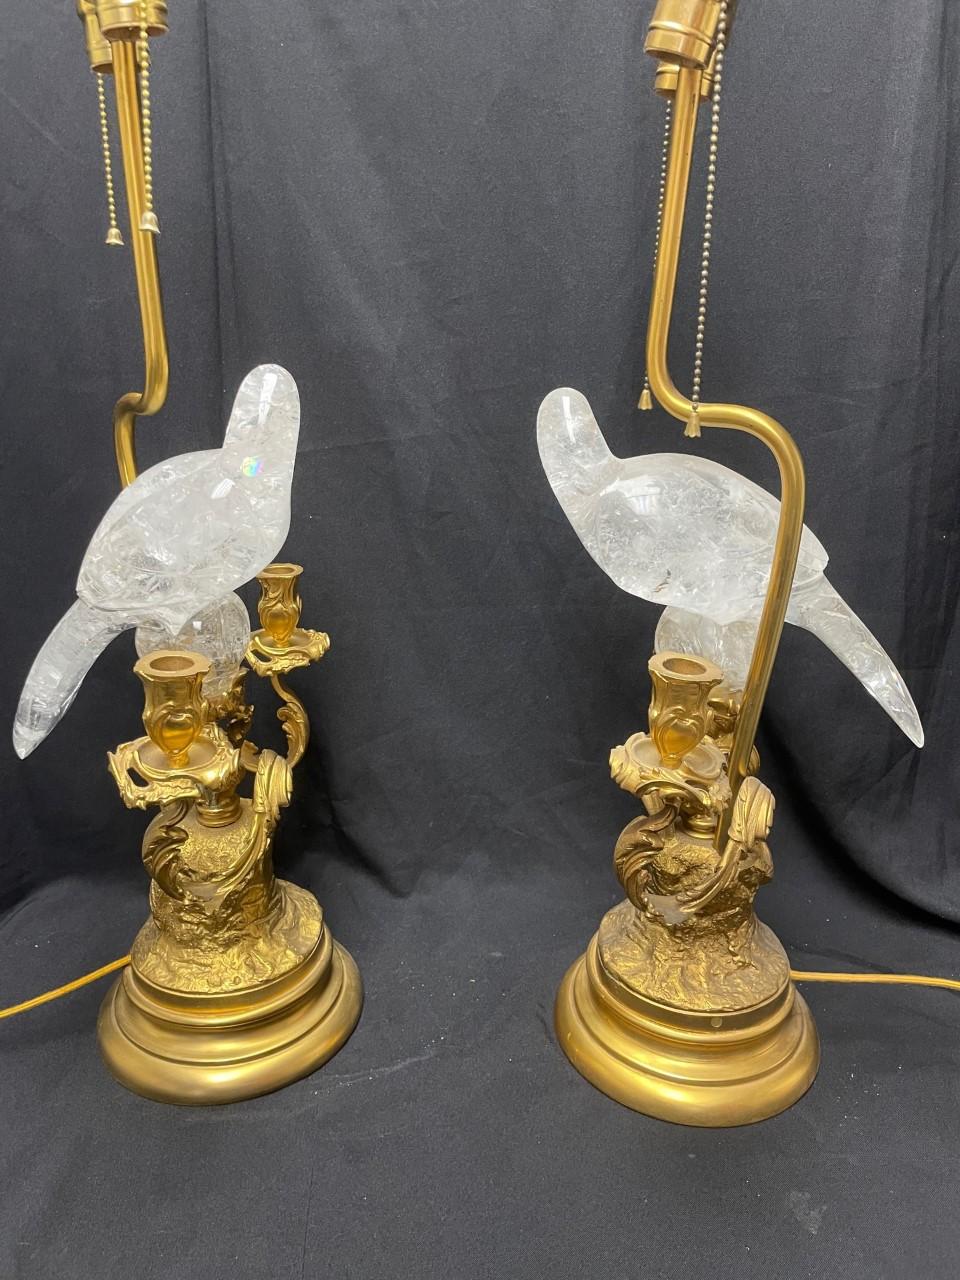 Ormolu and Rock Crystal Bird Candelabra Lamps, French Louis XV Style For Sale 4